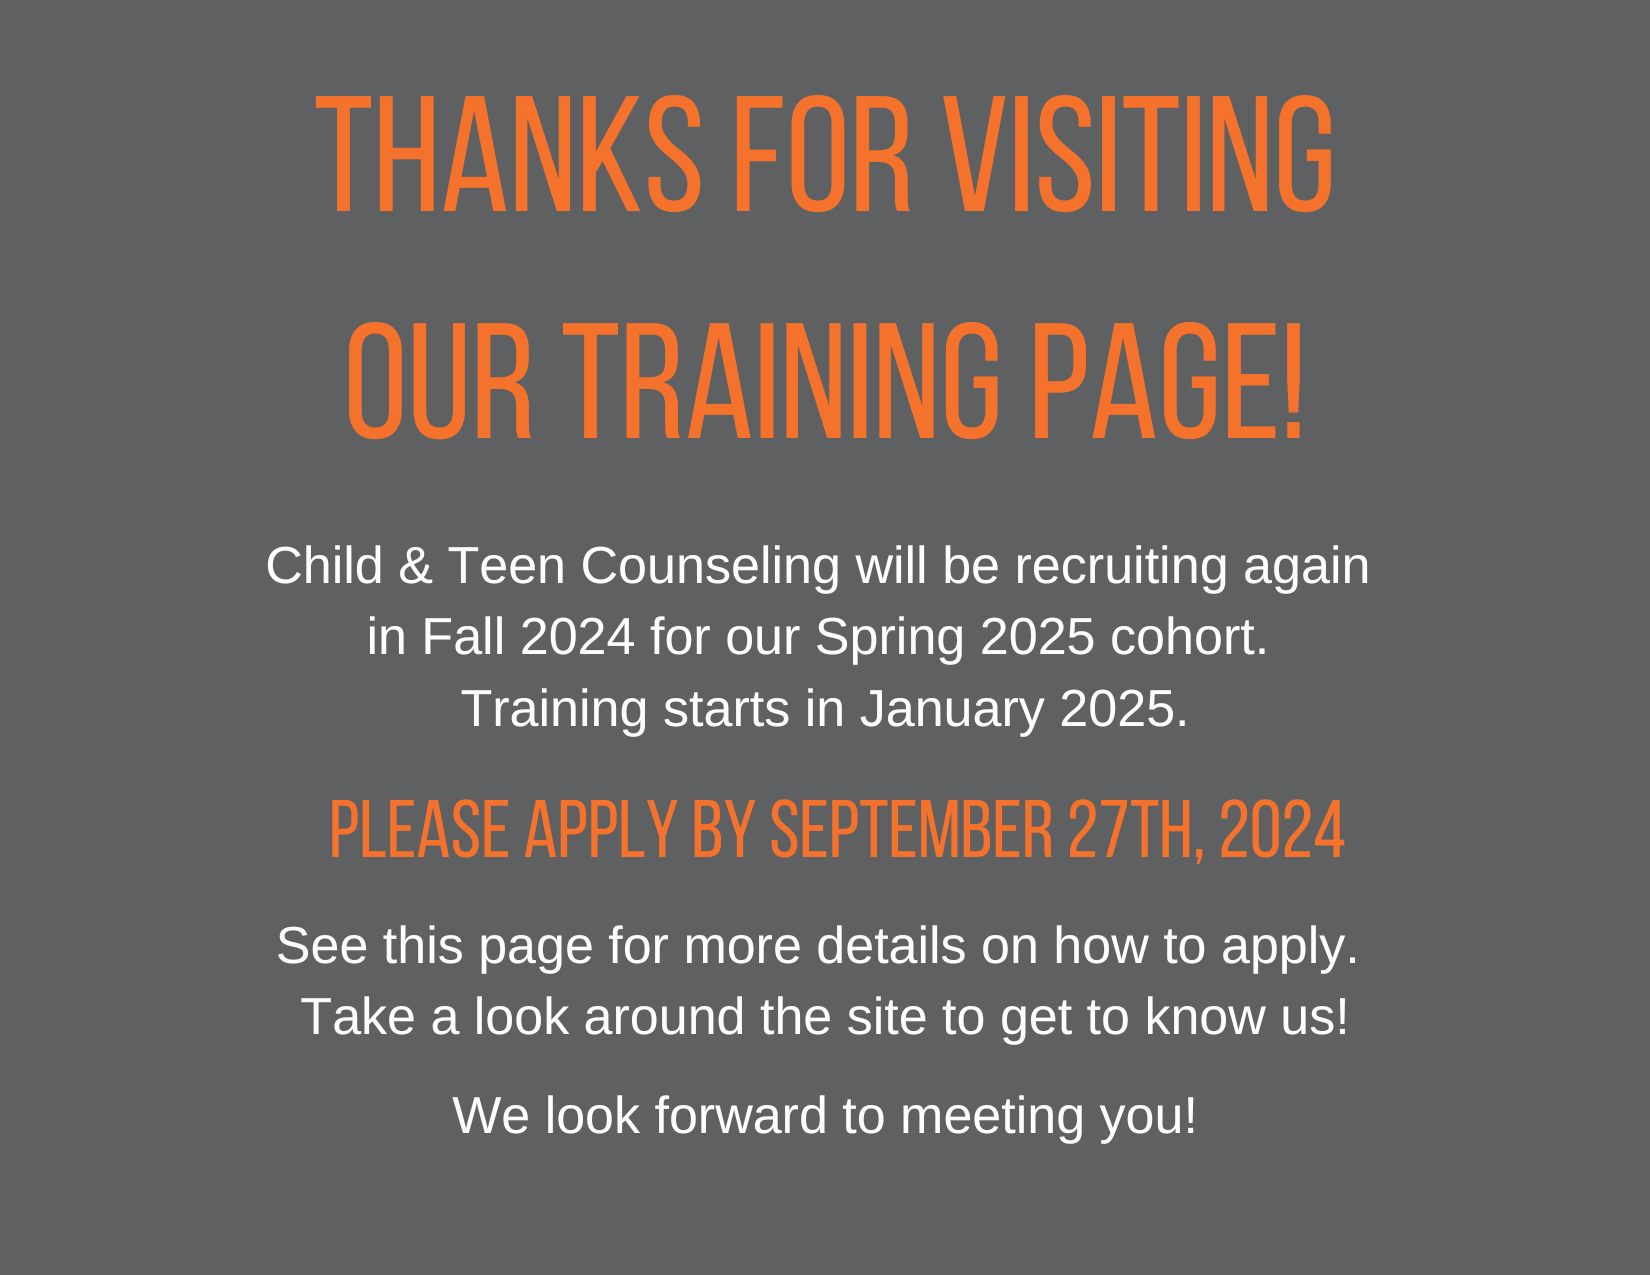 We'll be hiring again in October 2024. Apply by September 27